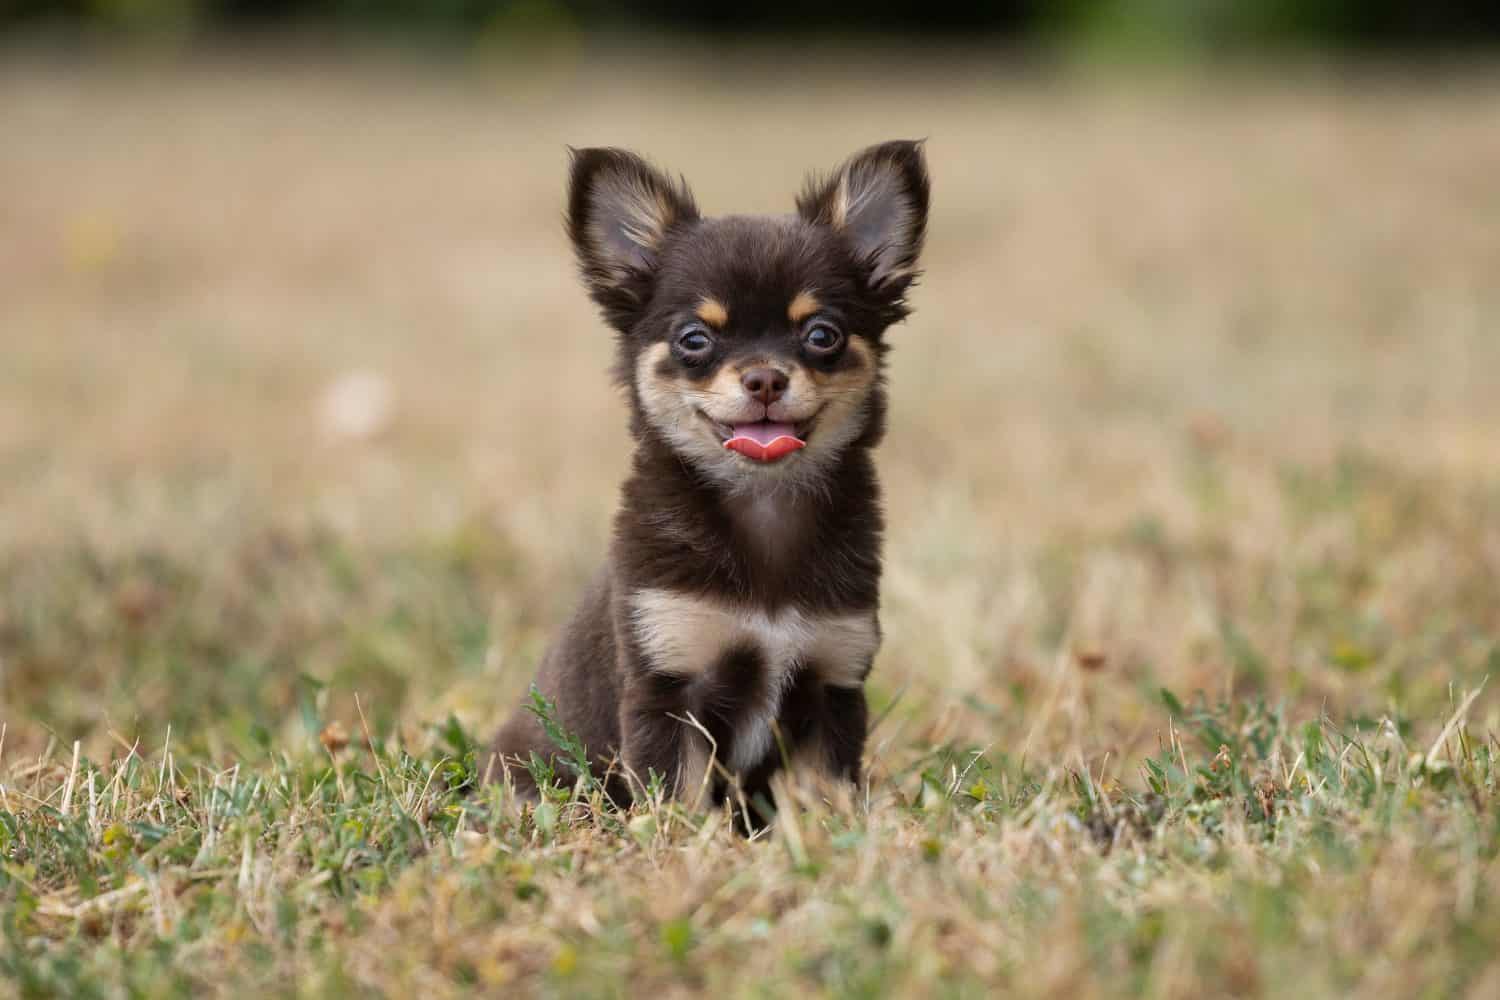 Portrait of Long Haired chihuahua puppy smiling